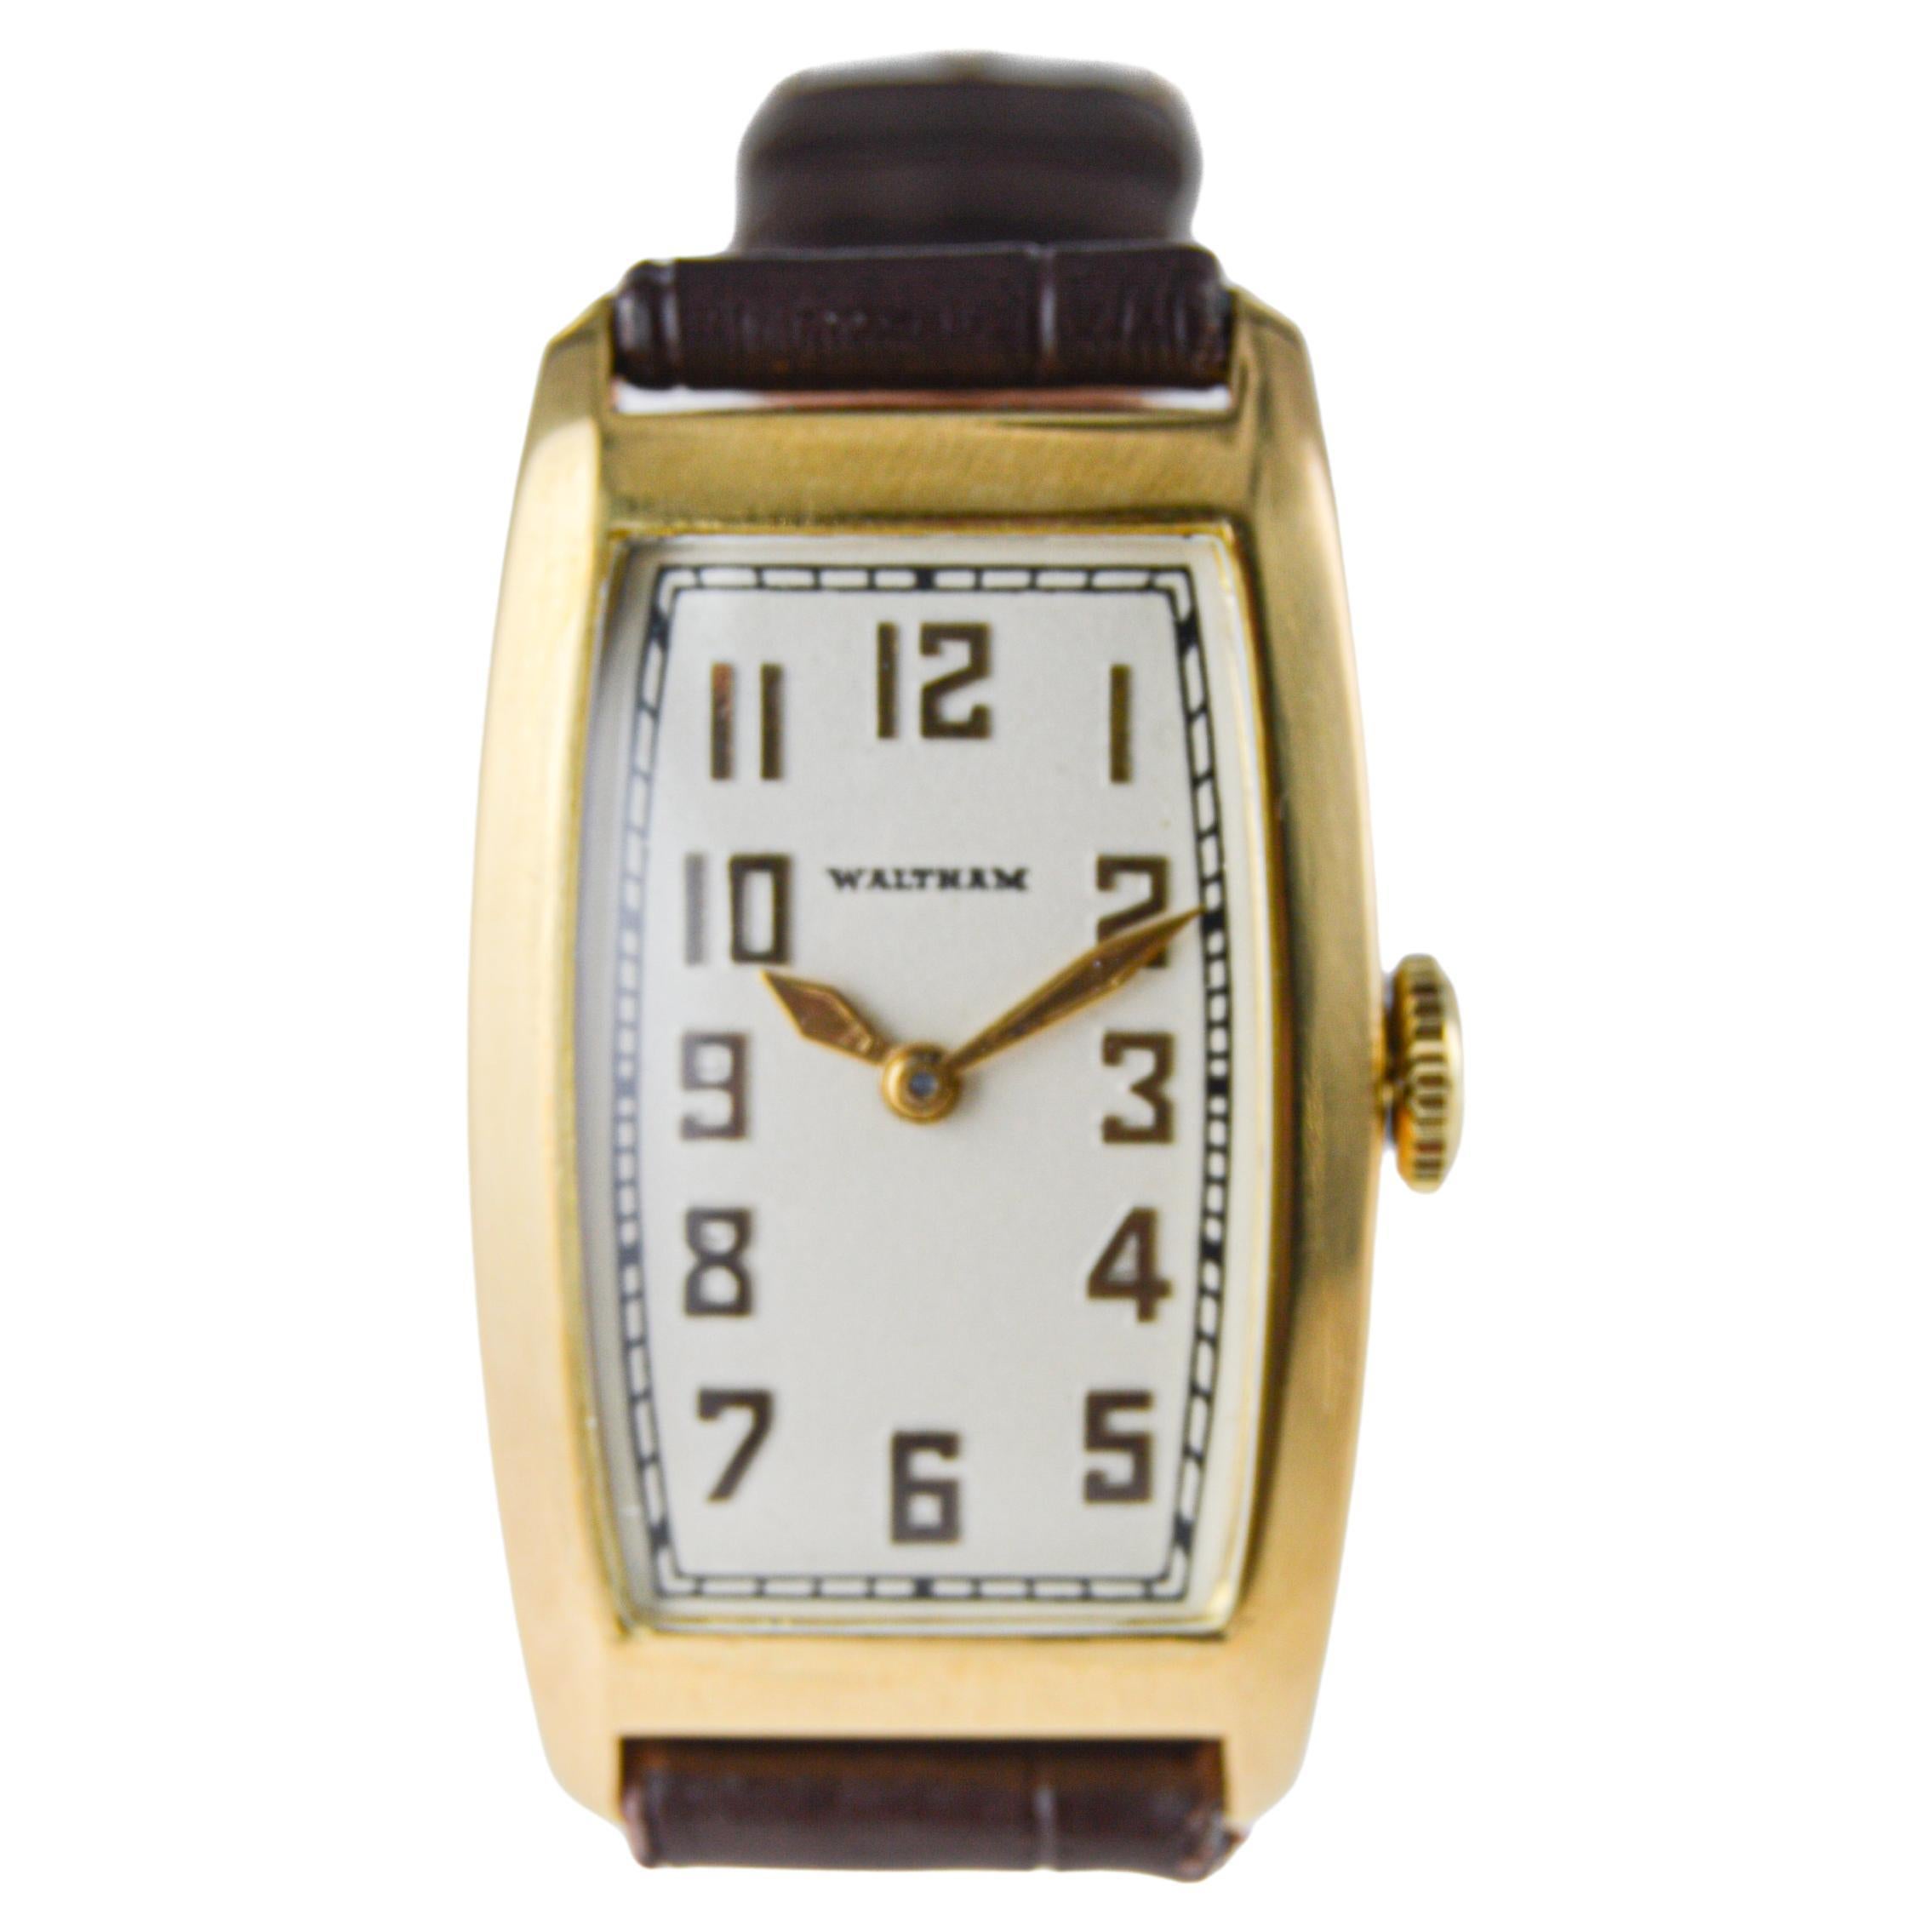 Waltham Gold Filled Art Deco Tonneau Watch with Flawless Original Dial From 1934 For Sale 1